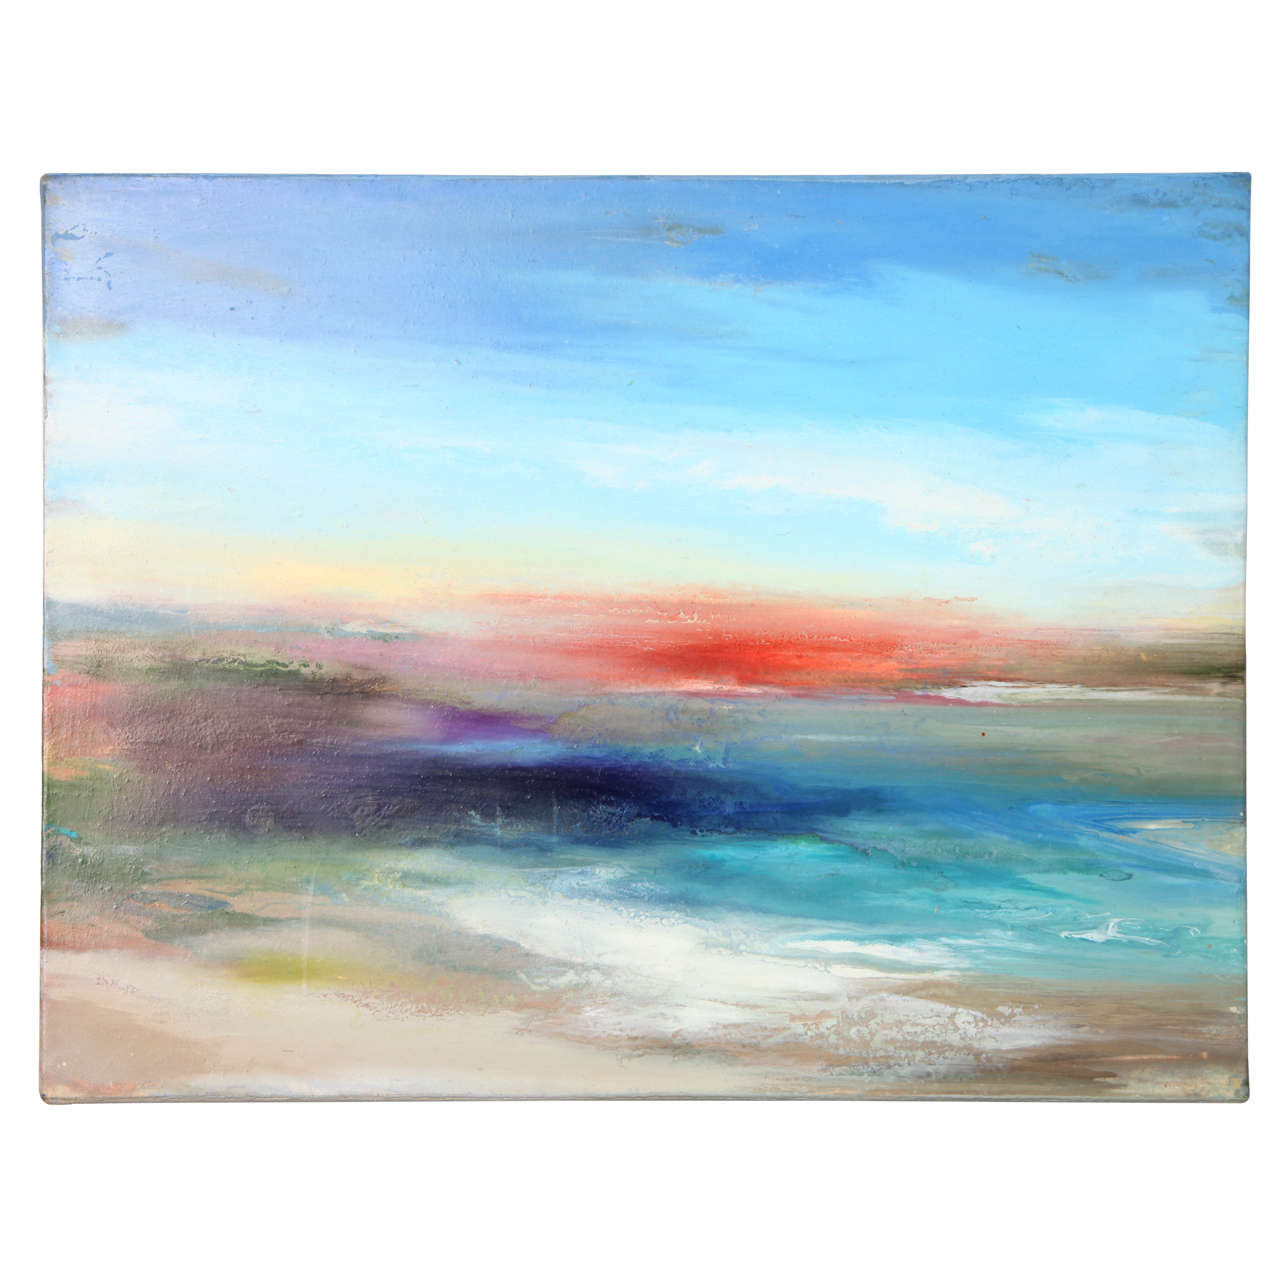 Ocean Beach Landscapes I Painting by William Engel at 1stdibs